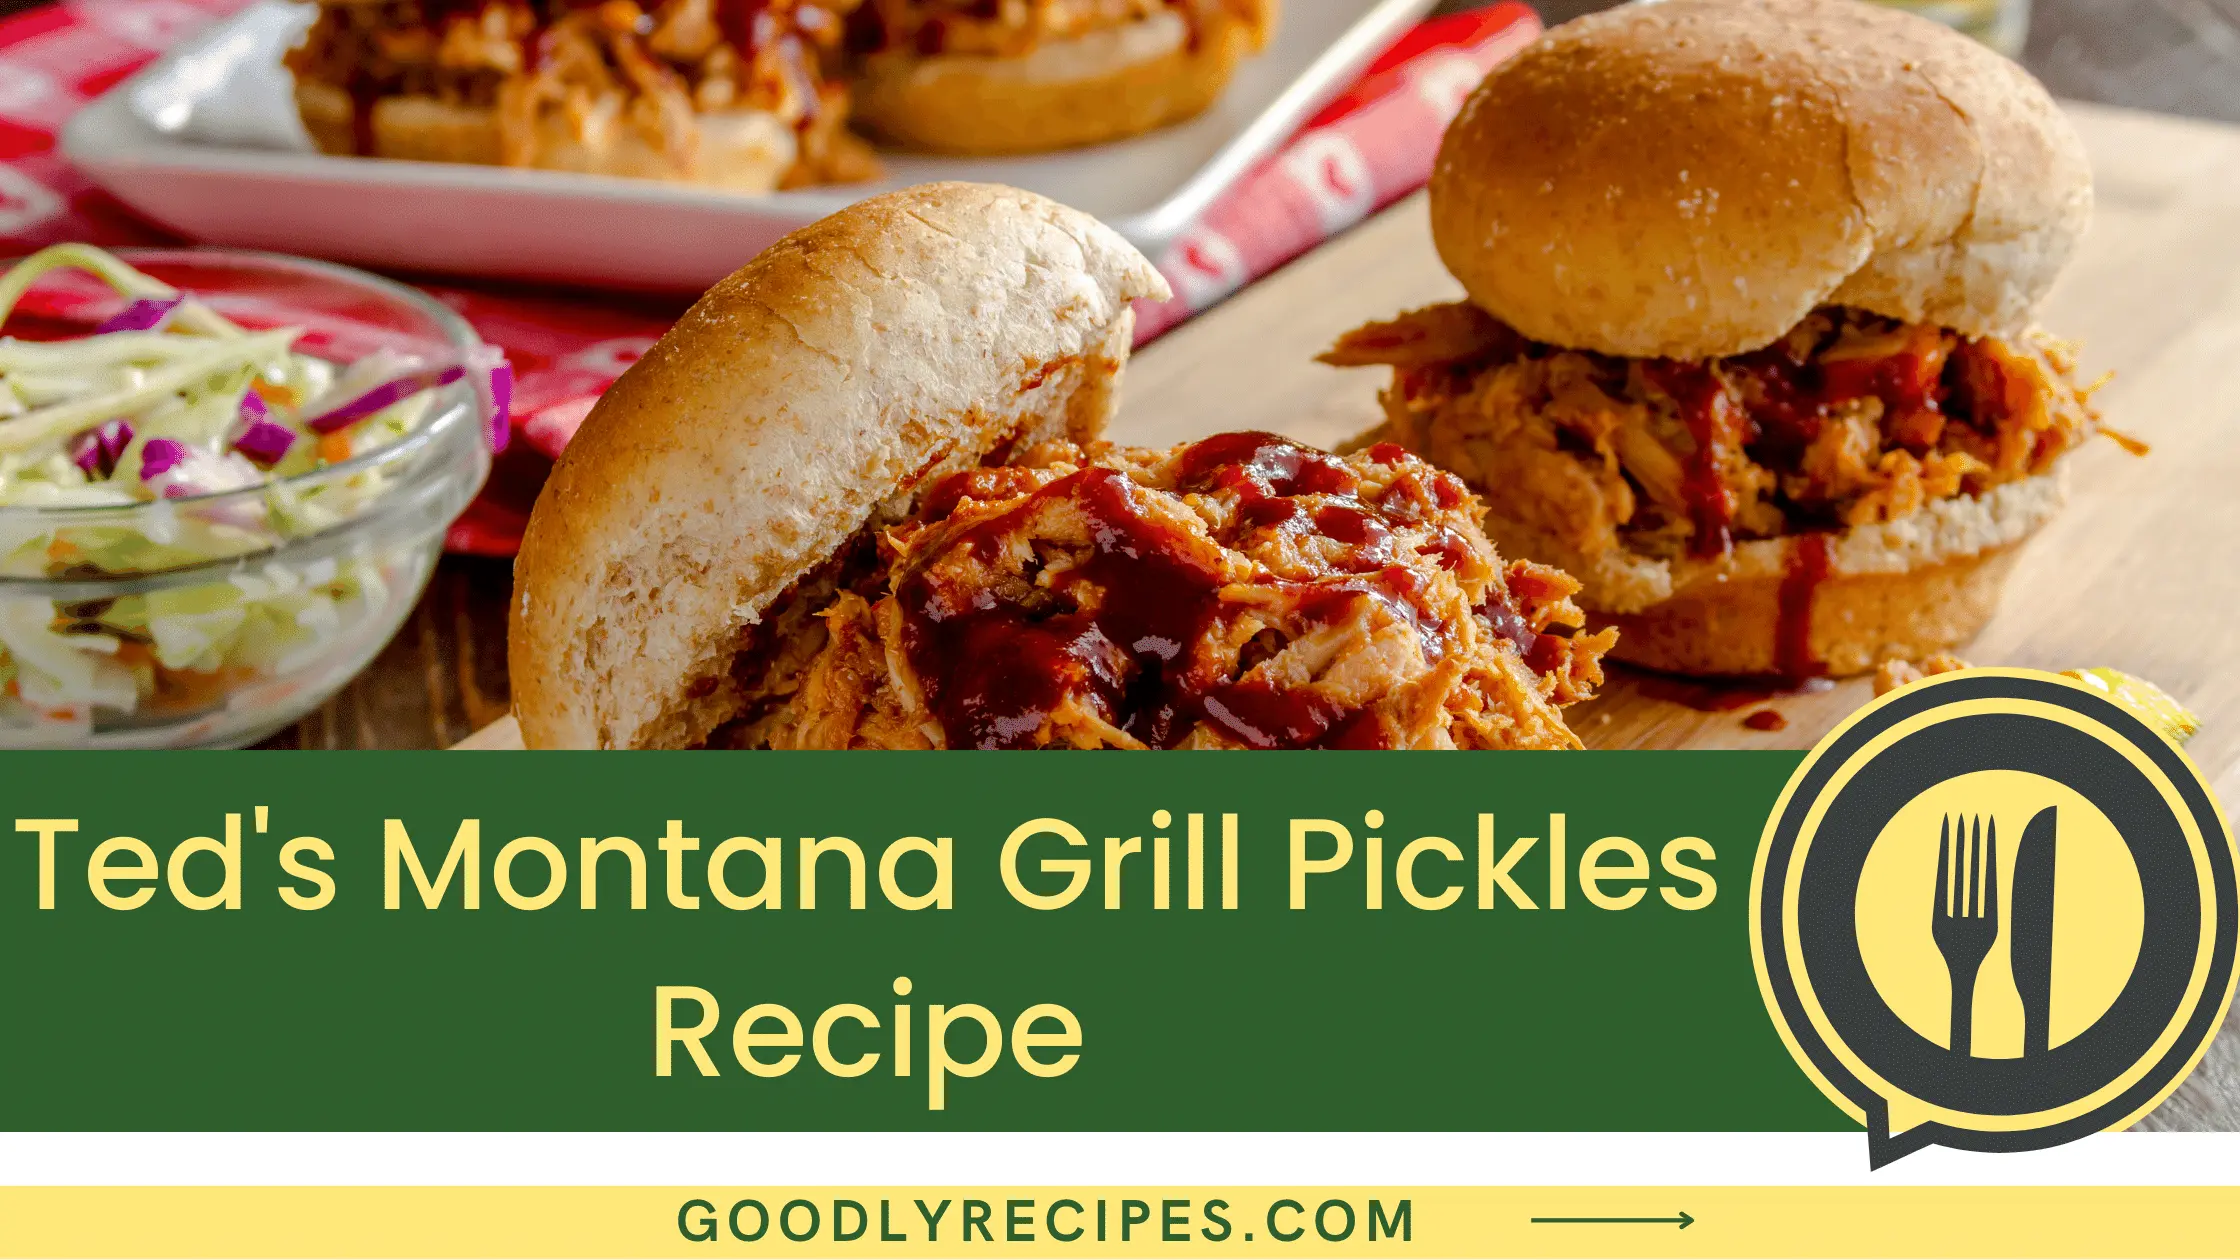 Ted's Montana Grill Pickles Recipe - For Food Lovers